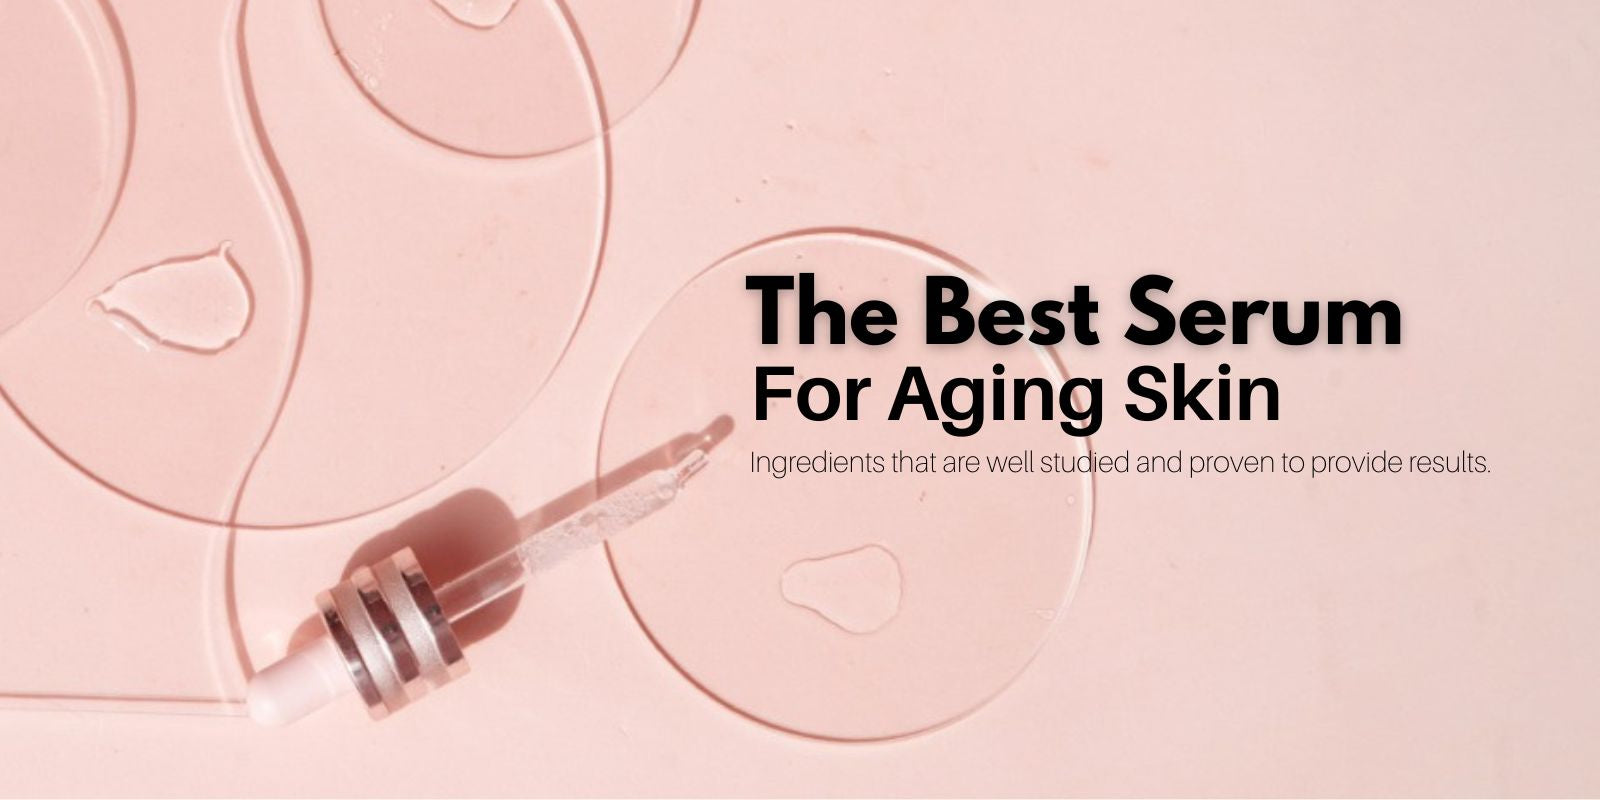 The best serum for aging skin. Greater Victoria bc